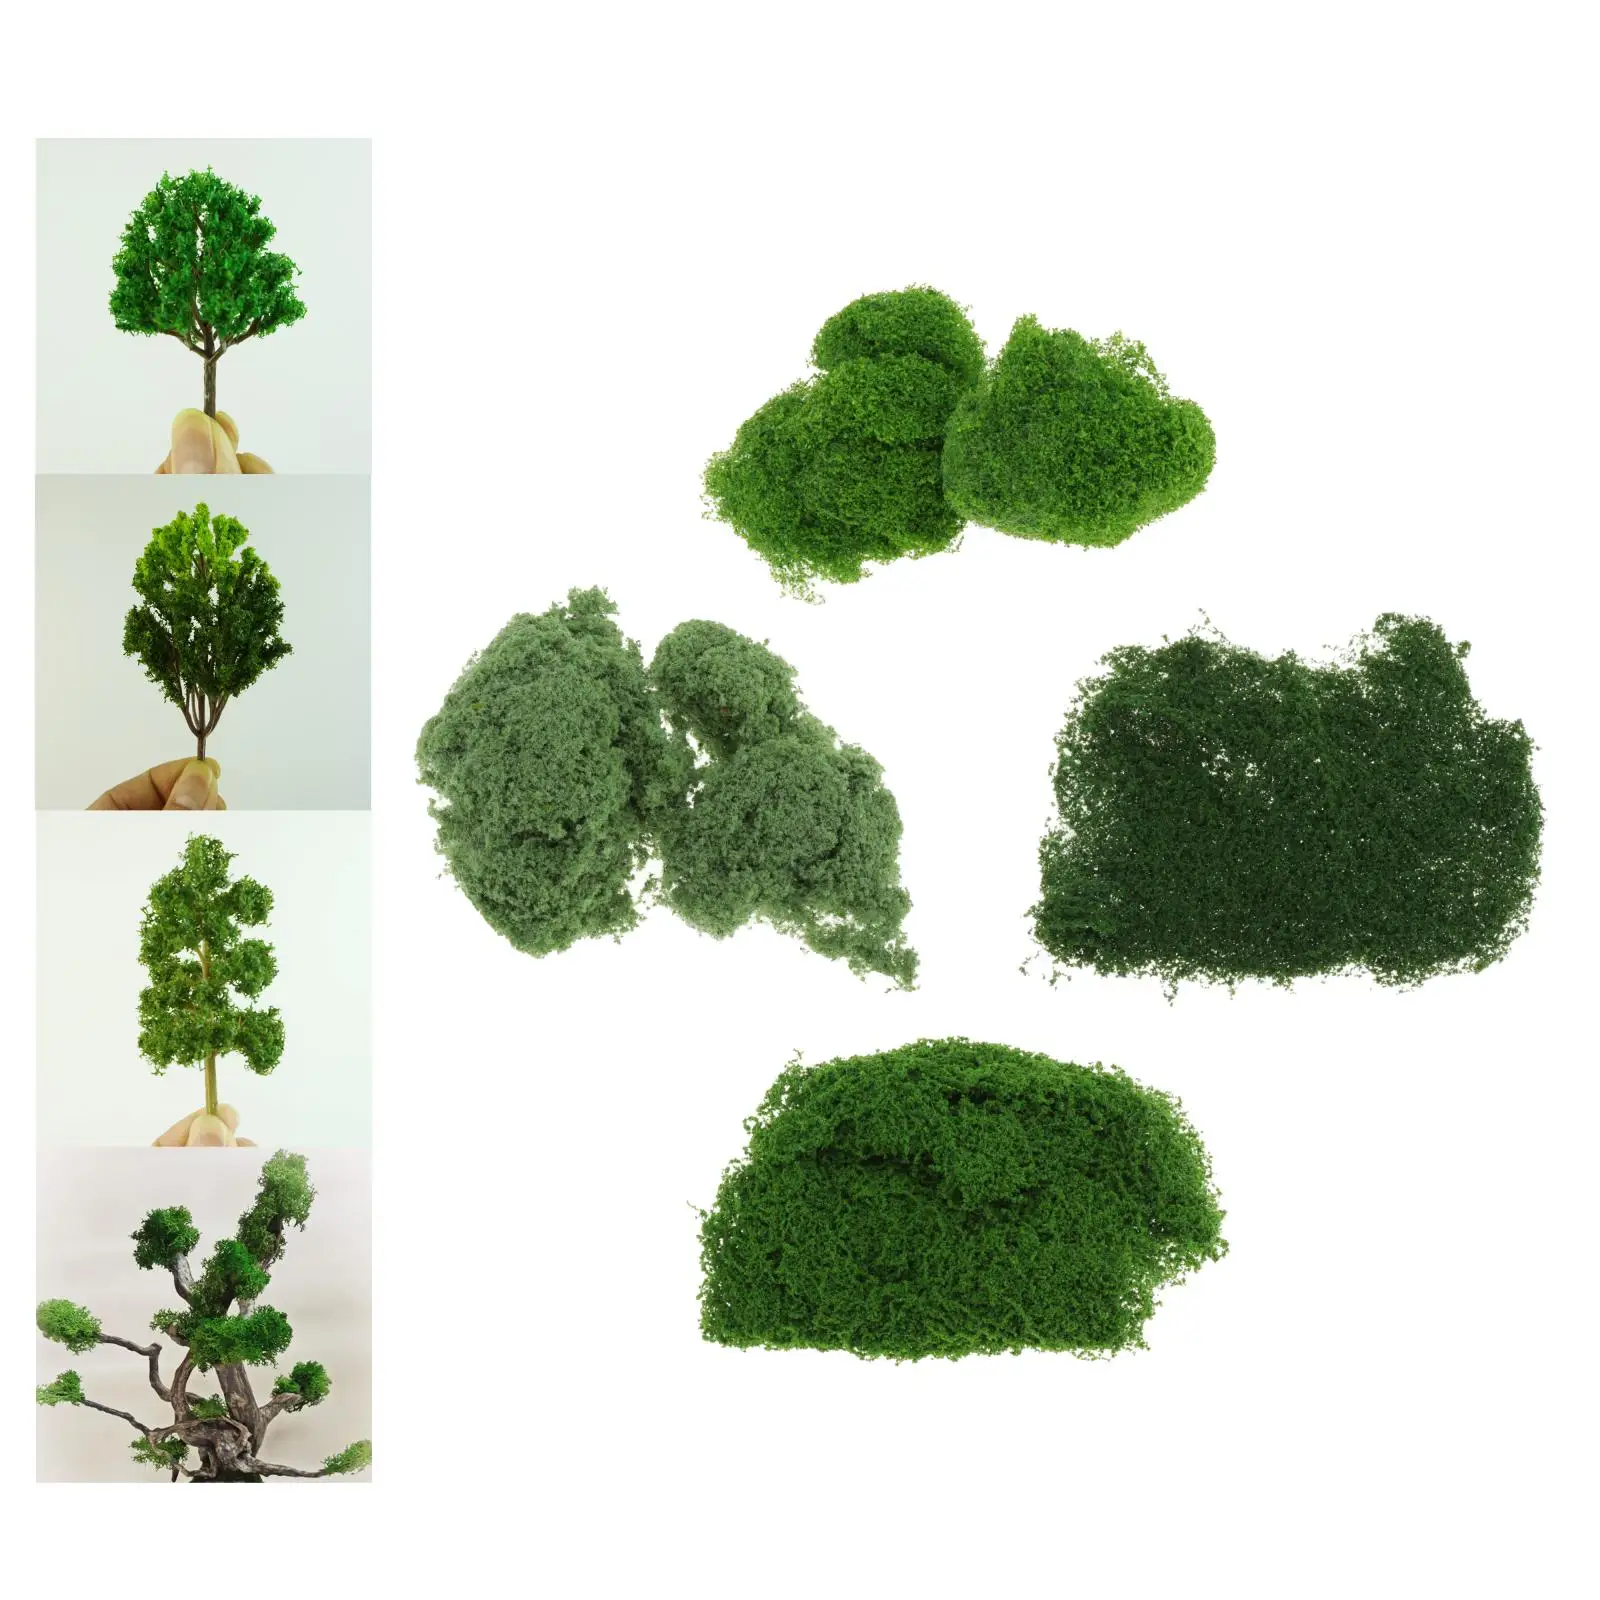 10g Model Static Grass Powder, Fake Grass for Miniature ,Terrain Landscape DIY Artificial, Sand Table Scenery Railway Layout